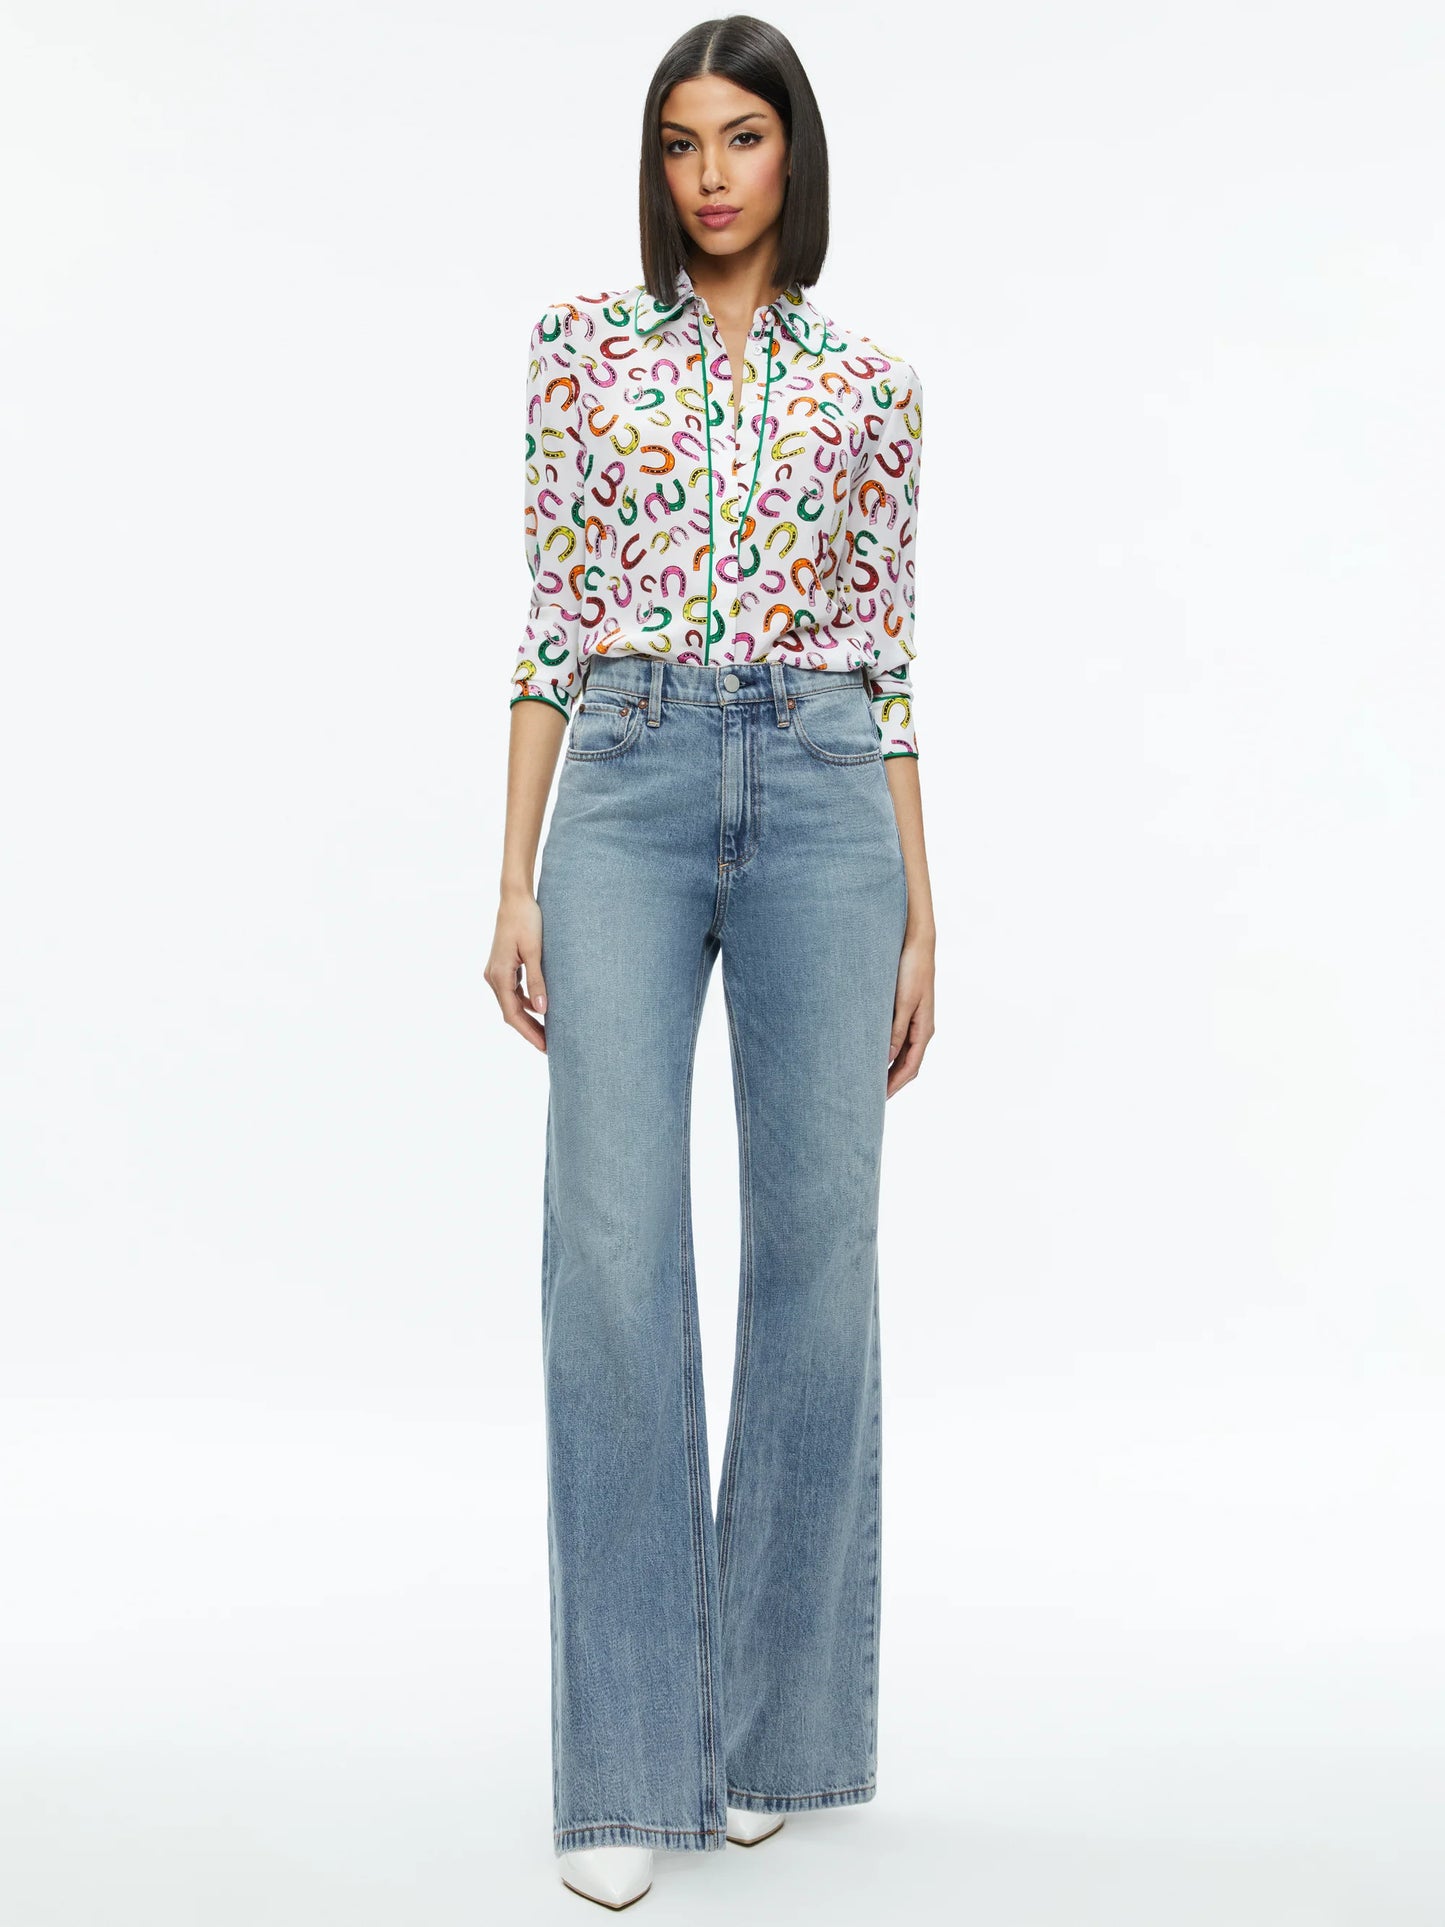 Willa Placket Top With Piping Lucky You - Alice + Olivia